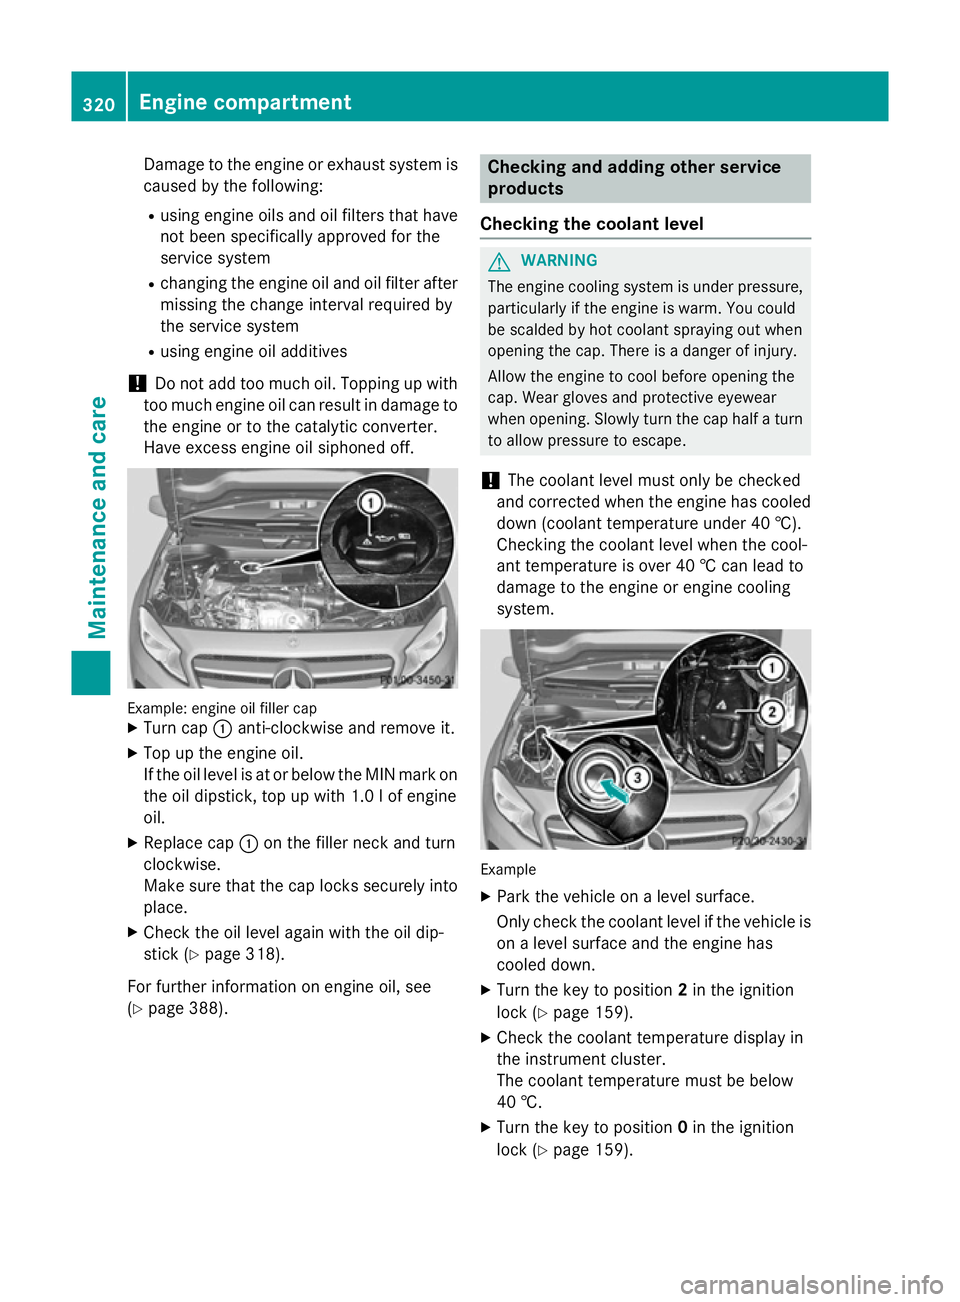 MERCEDES-BENZ GLA SUV 2013  Owners Manual Damage to the engine or exhaust system is
caused by the following:
R using engine oils and oil filters that have
not been specifically approved for the
service system
R changing the engine oil and oil